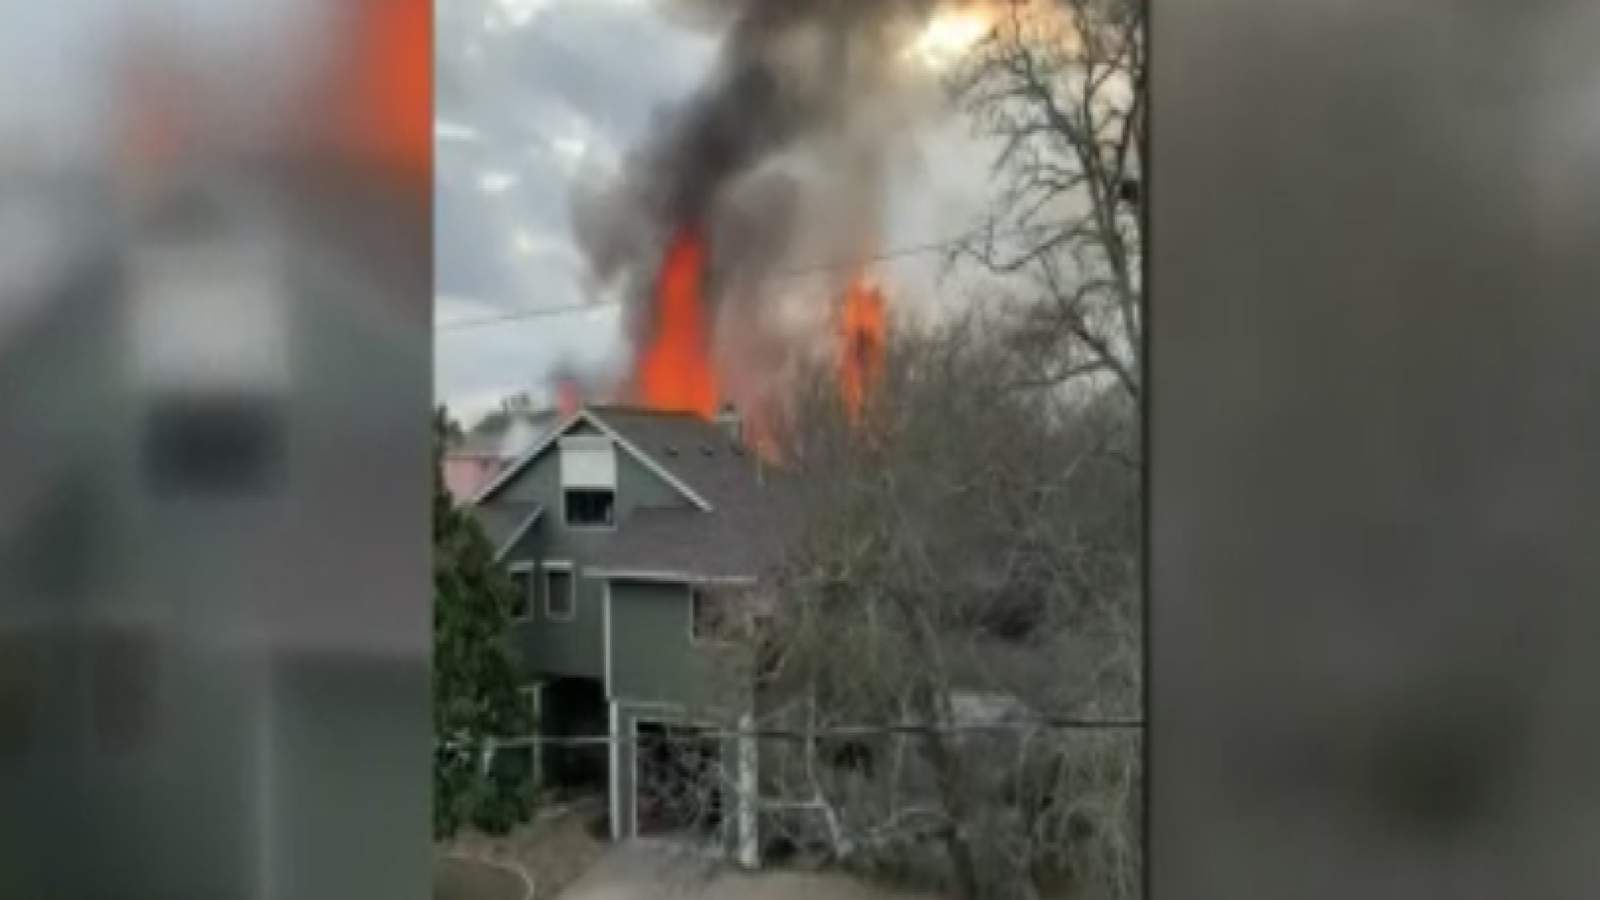 ‘Sounded like ammunition’: Neighbors watch as flames destroy home in Galveston County